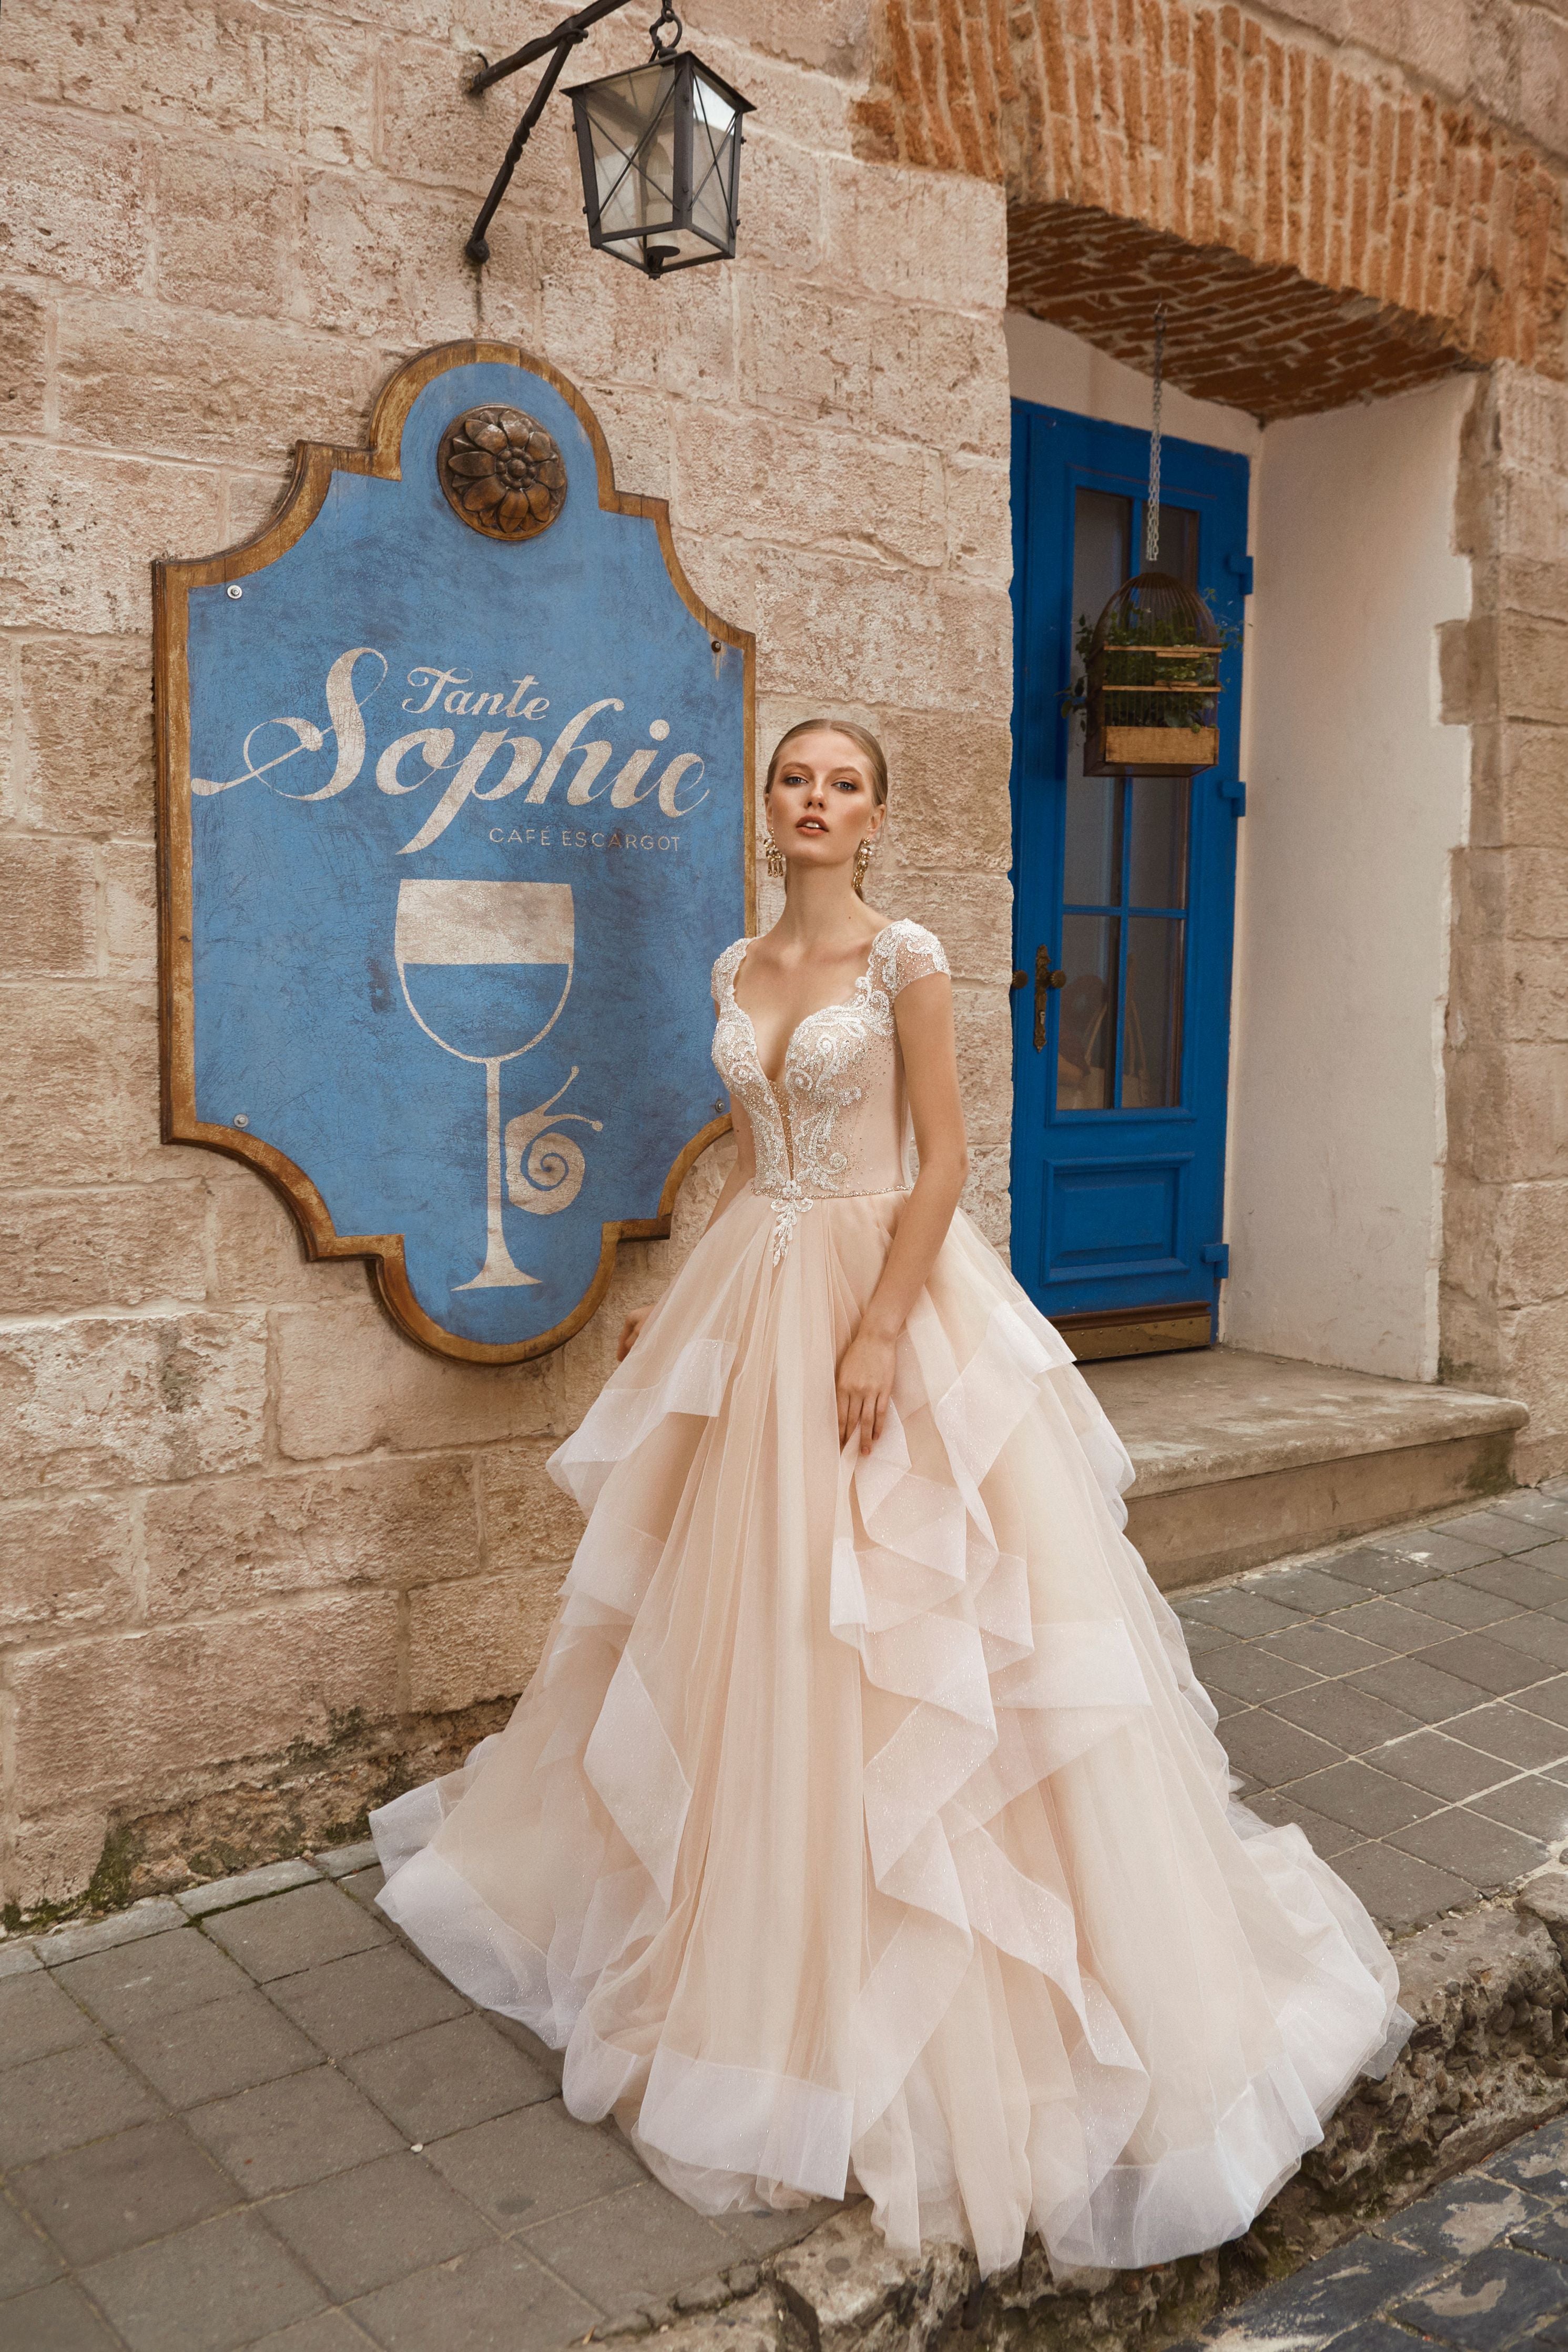 Sophie - Ruffled Skirt Ball Gown with Sweetheart Neckline - Maxima Bridal